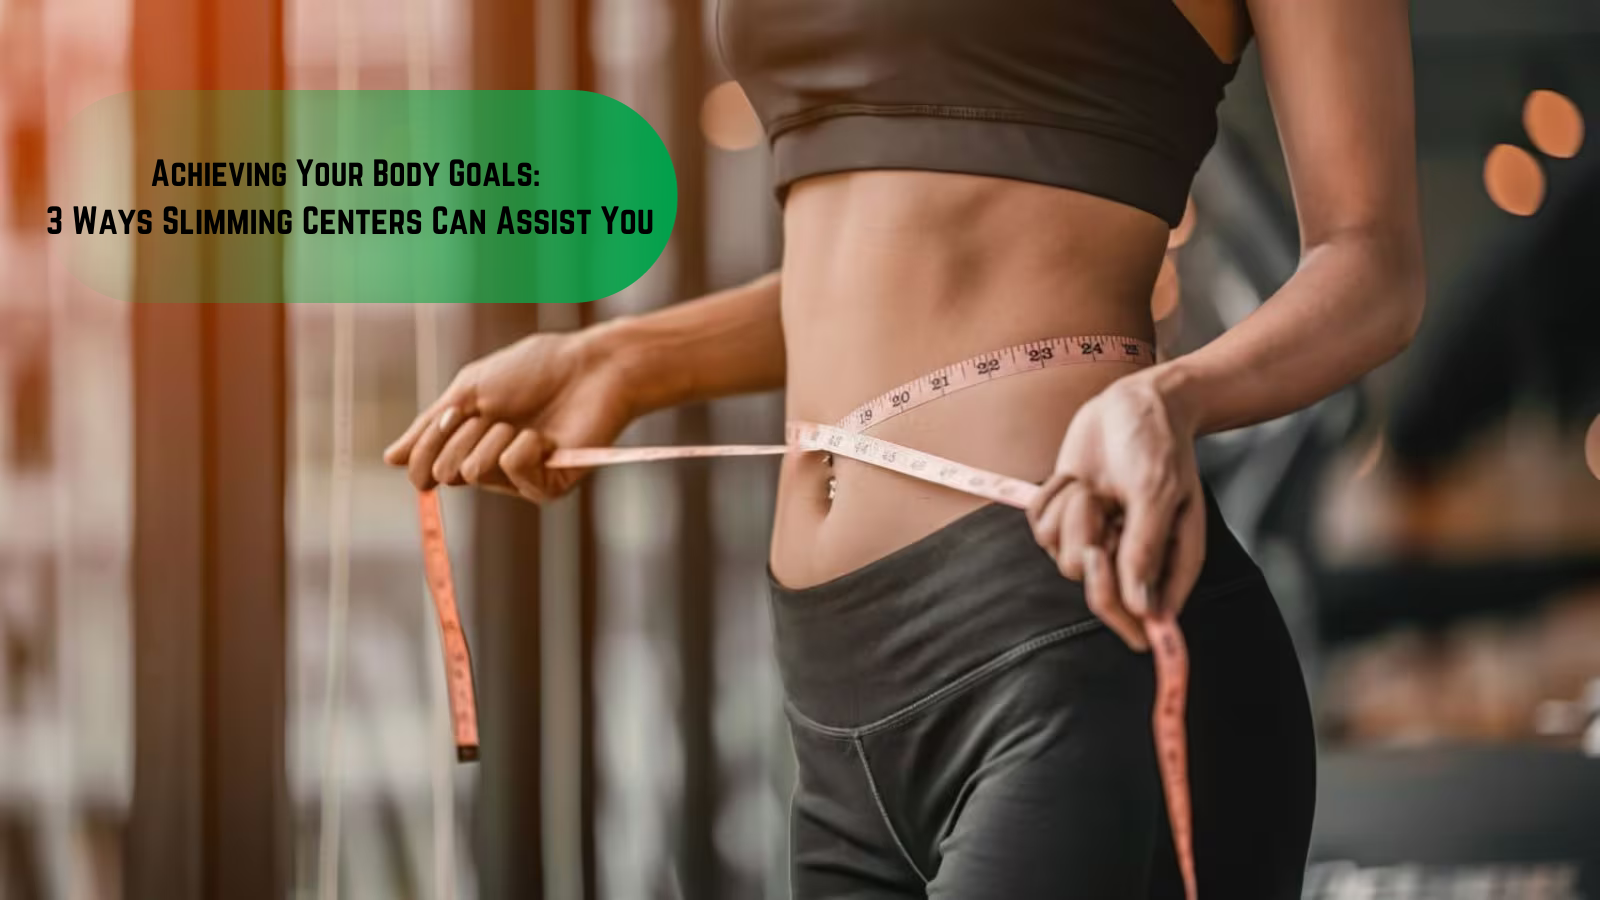 Achieving Your Body Goals: 3 Ways Slimming Centers Can Assist You